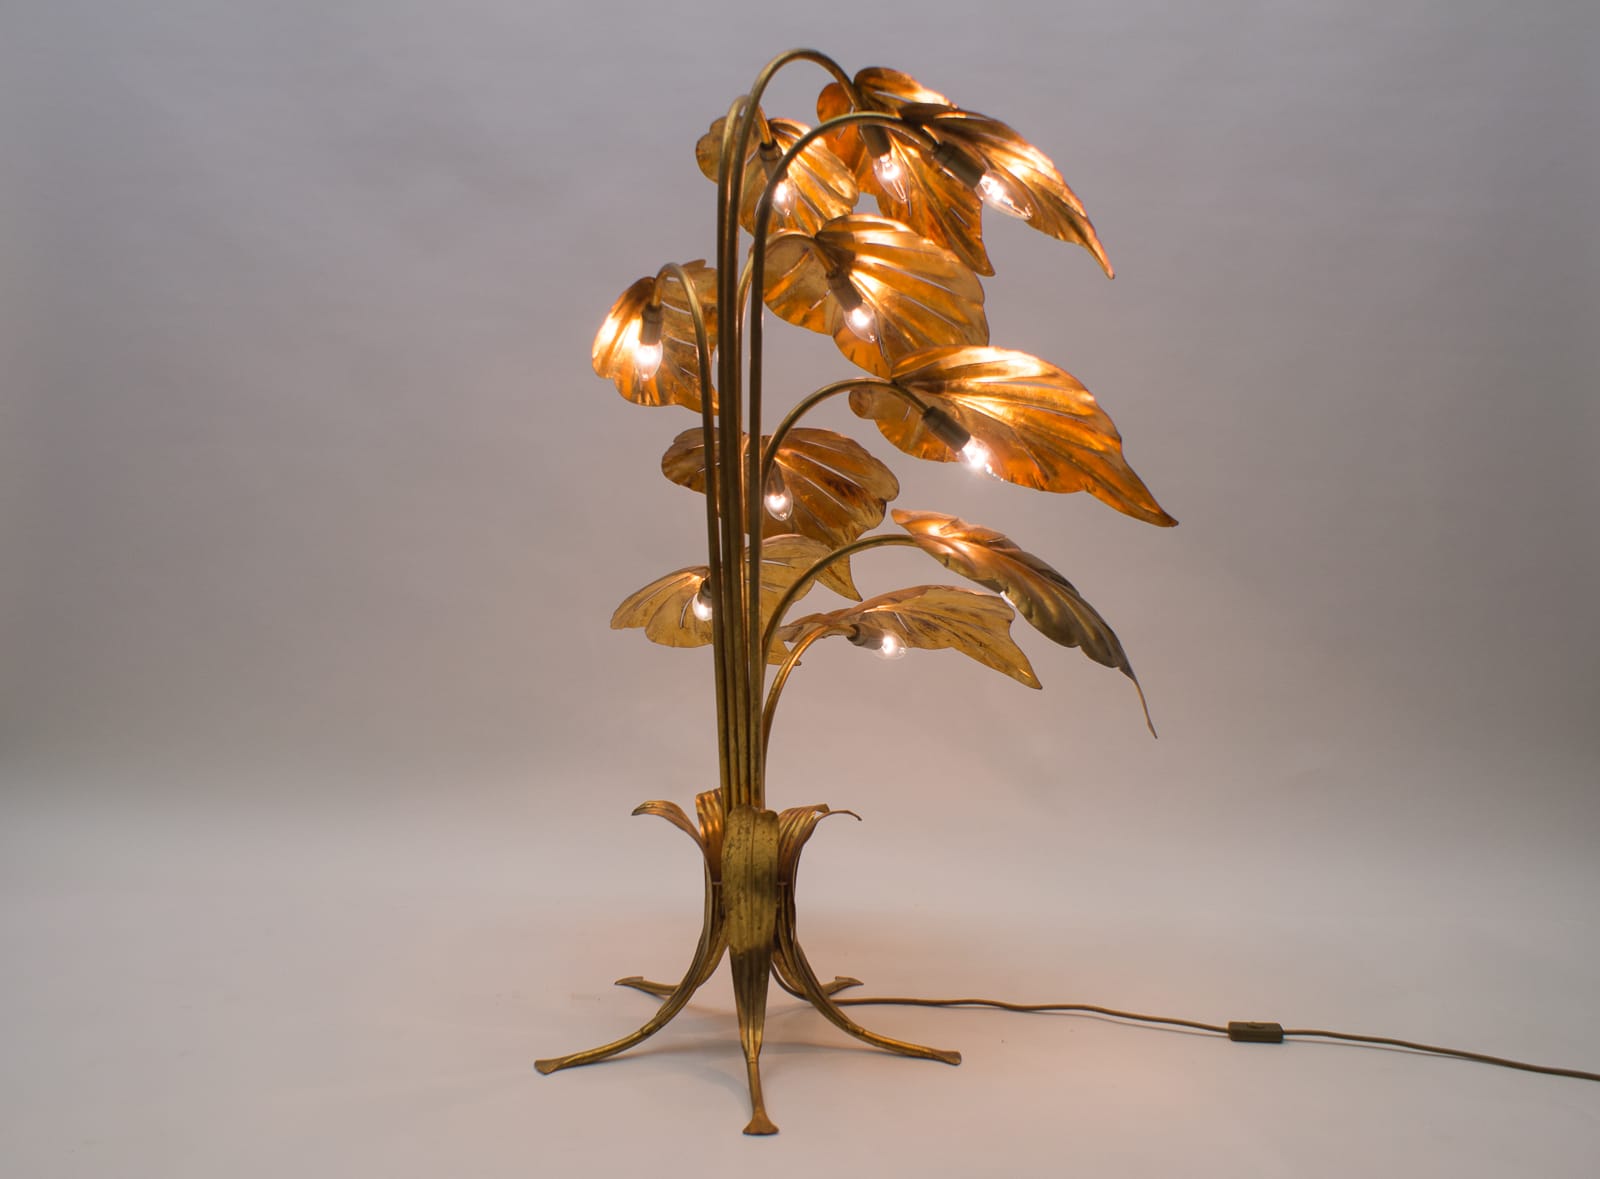 This lamp requires 10x E27 bulbs.
Very high quality workmanship with many nice details.
Very good vintage condition.
Suitable for all living areas and very decorative.
Material: Gilded metal, 10 sockets
Period: 1960
Dimensions: H 108cm, W